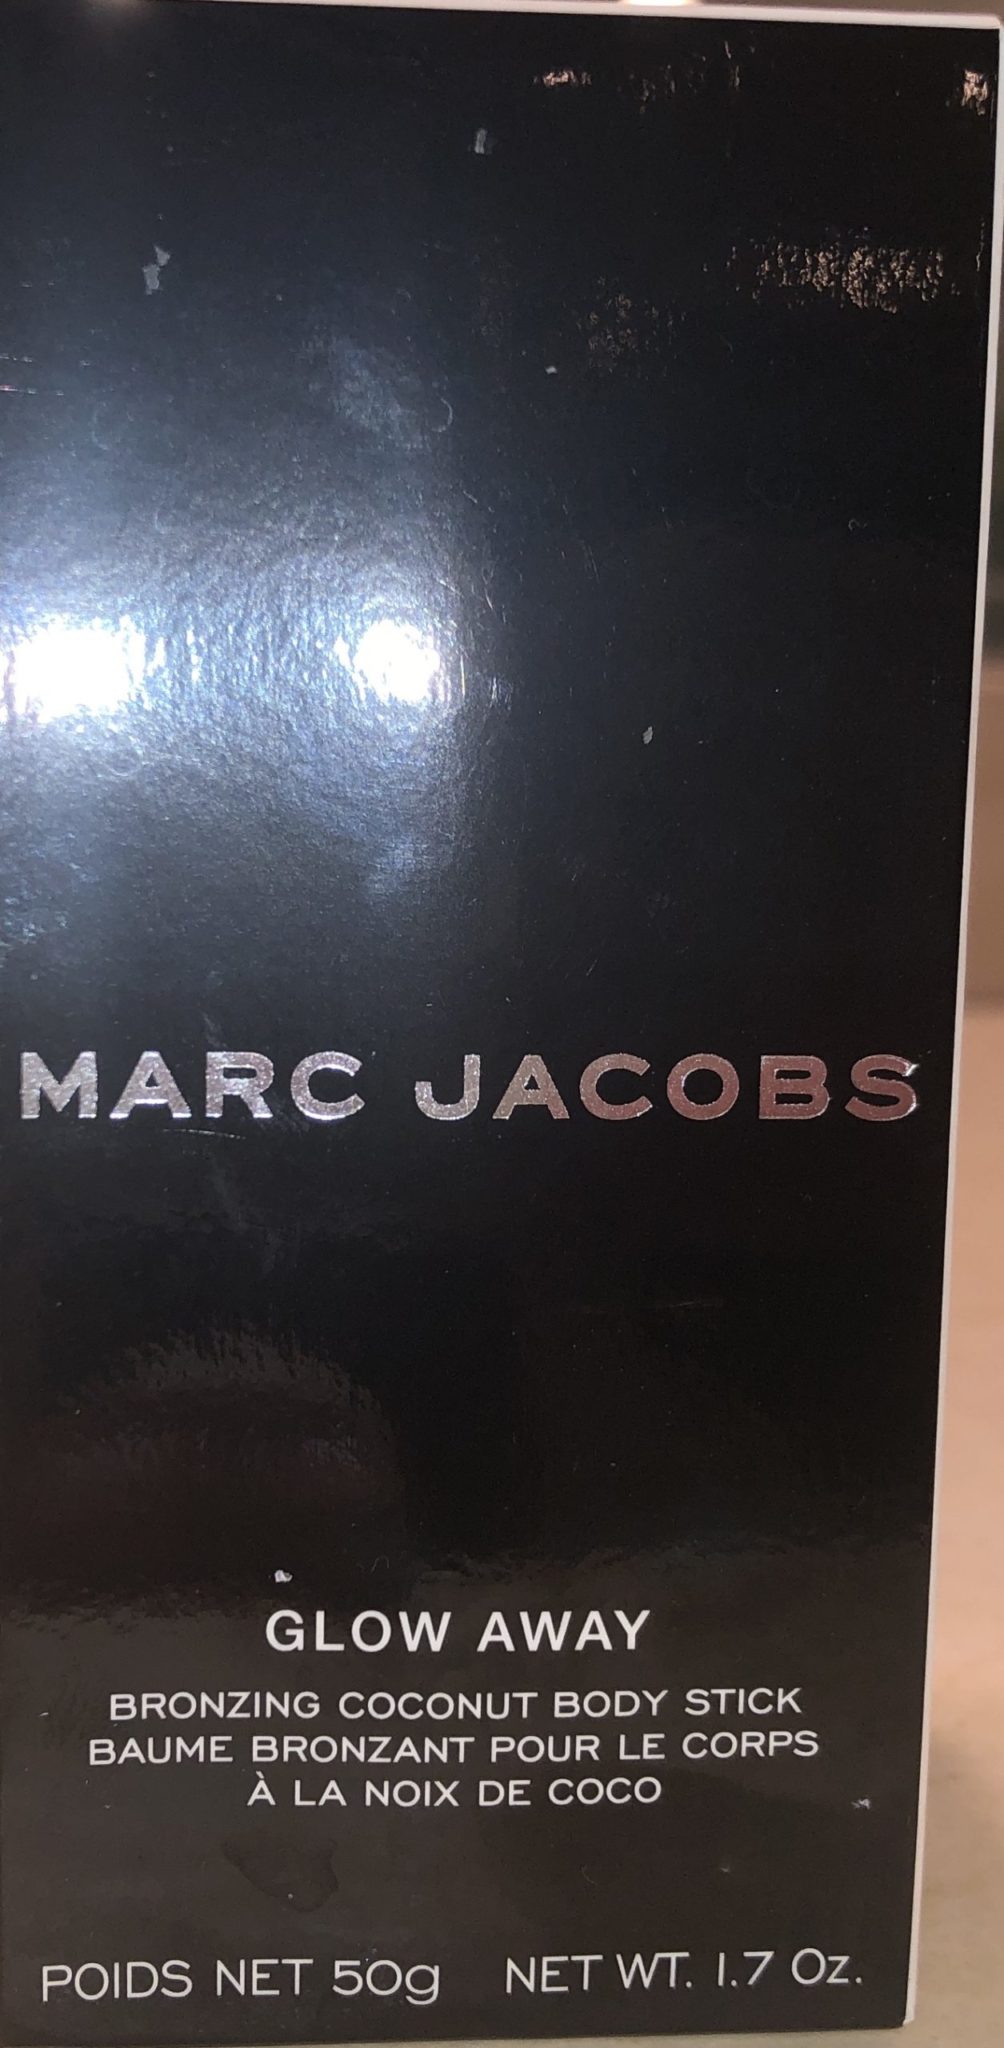 THE OUTER BOX FOR THE MARC JACOBS GLOW AWAY BRONZING COCONUT BODY STICK 